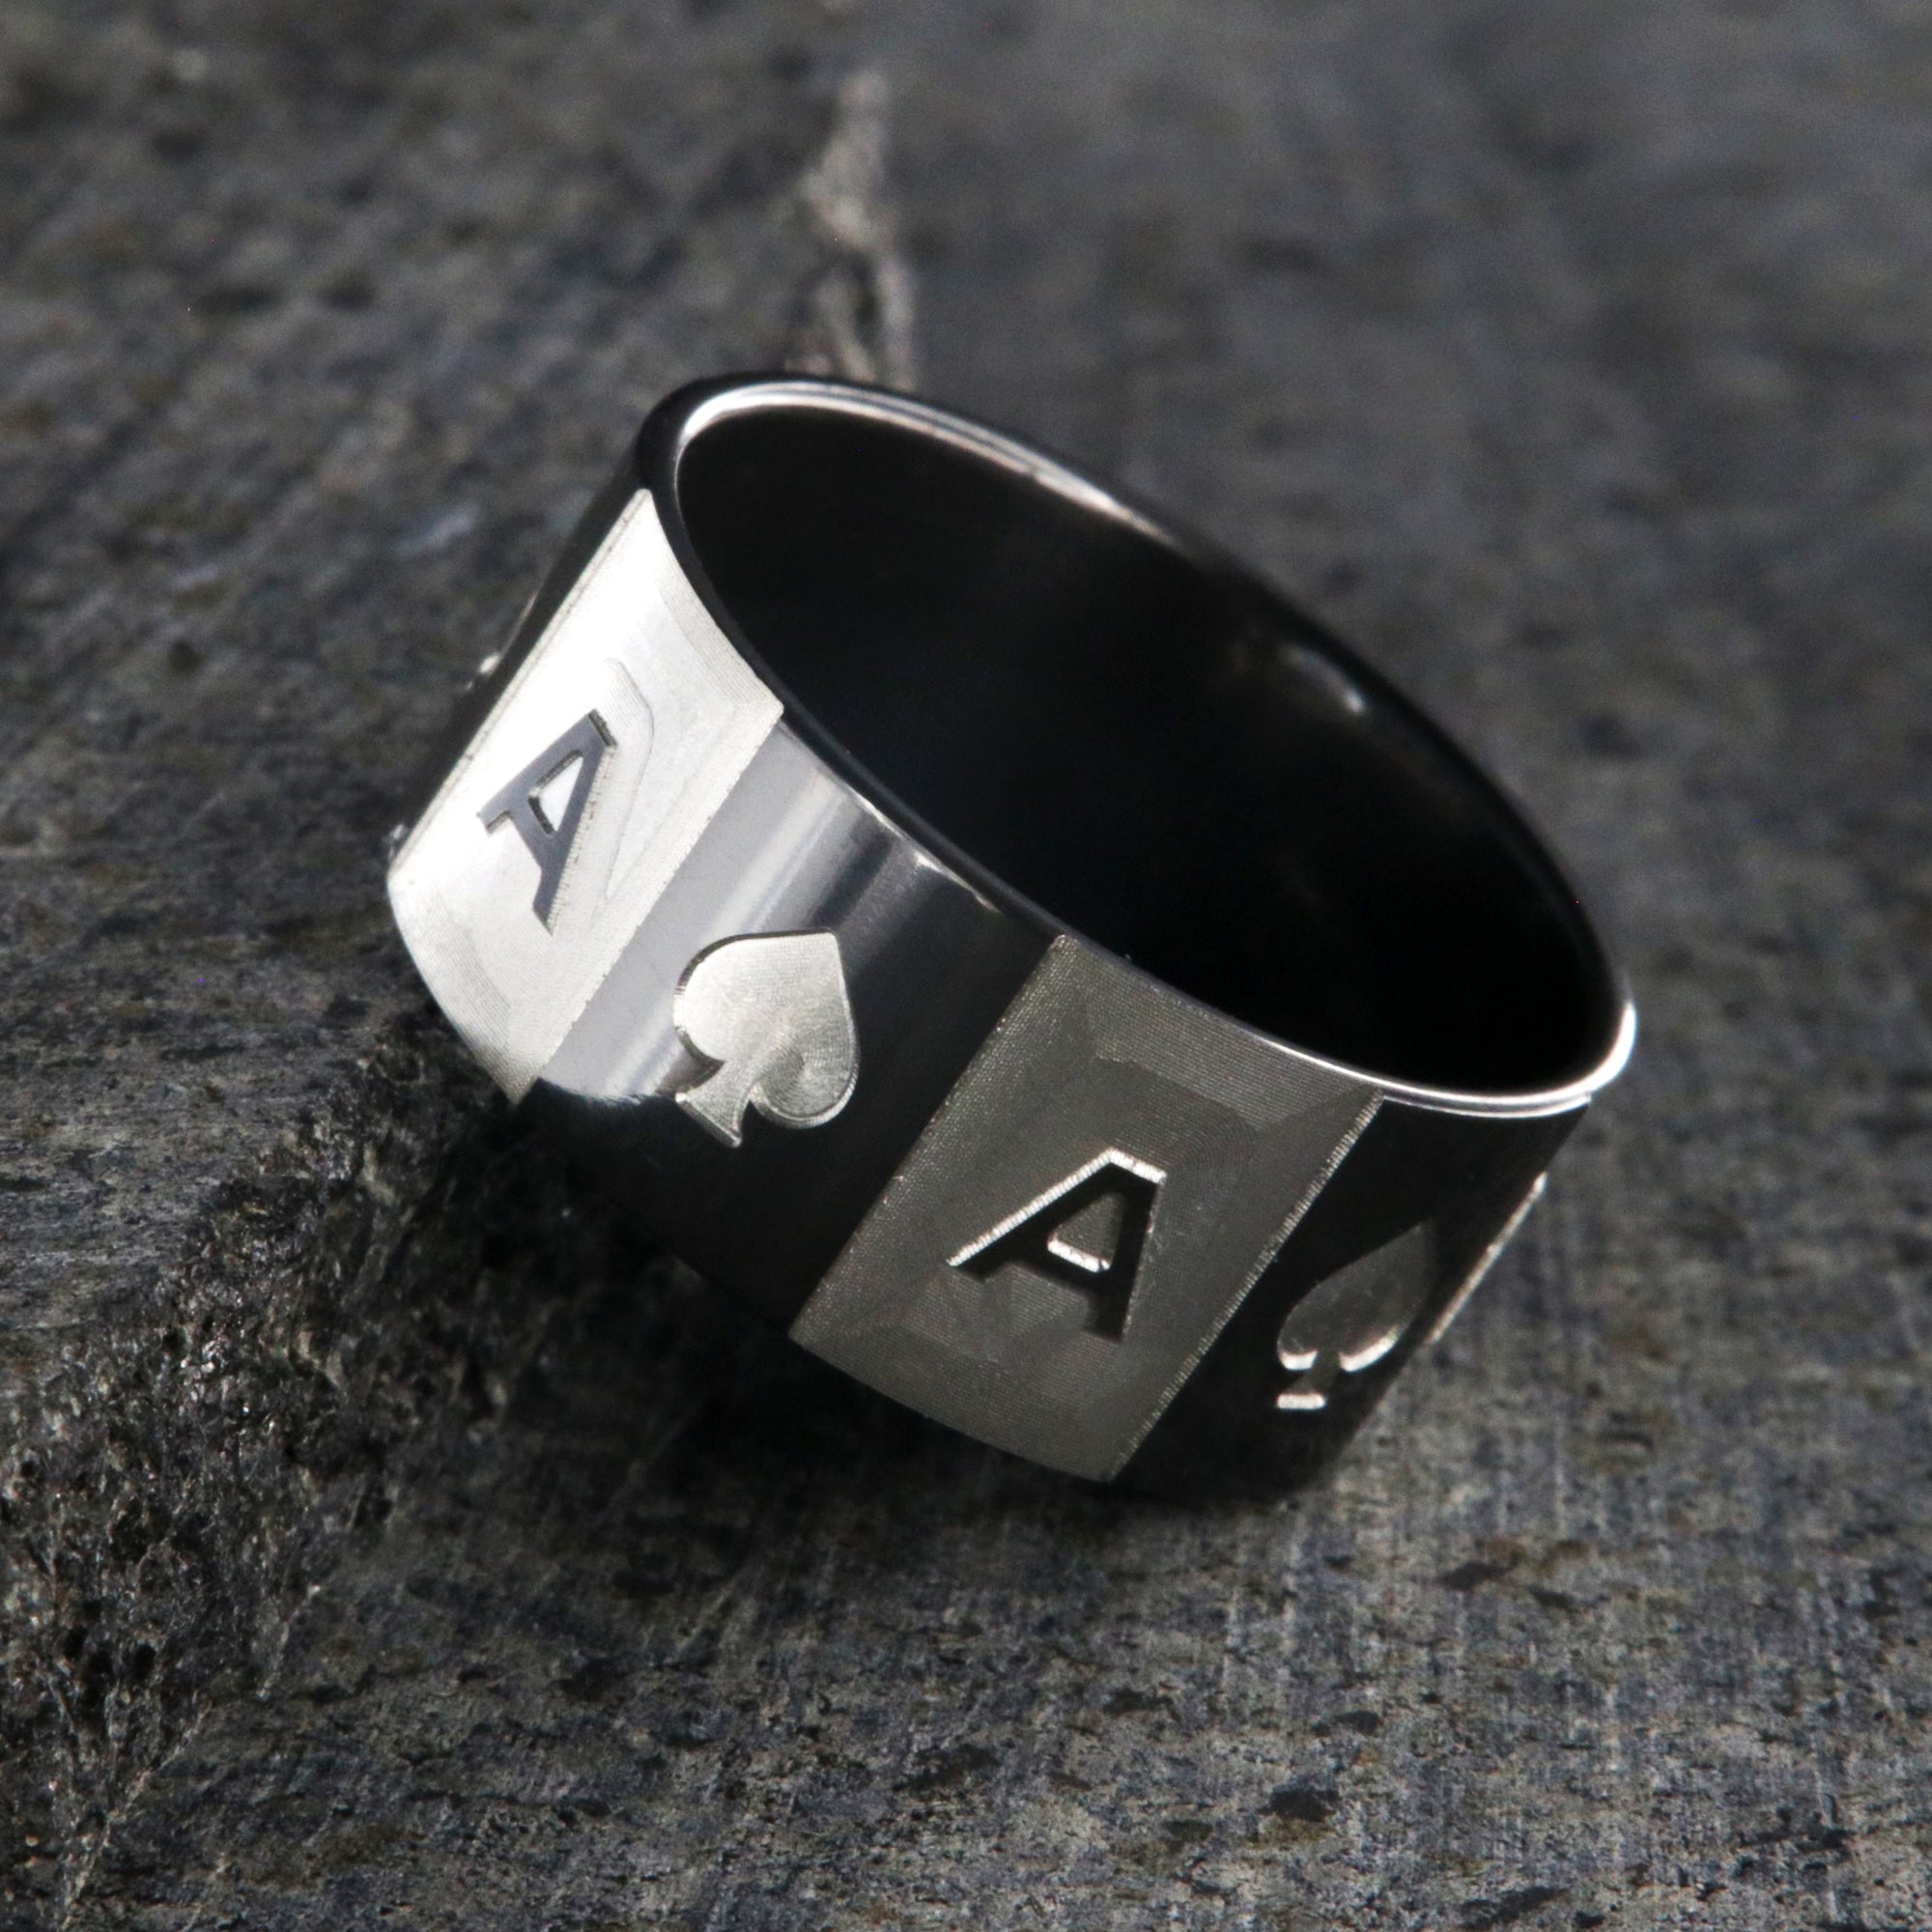 10mm wide black zirconium ace of spades ring with alternating two-tone